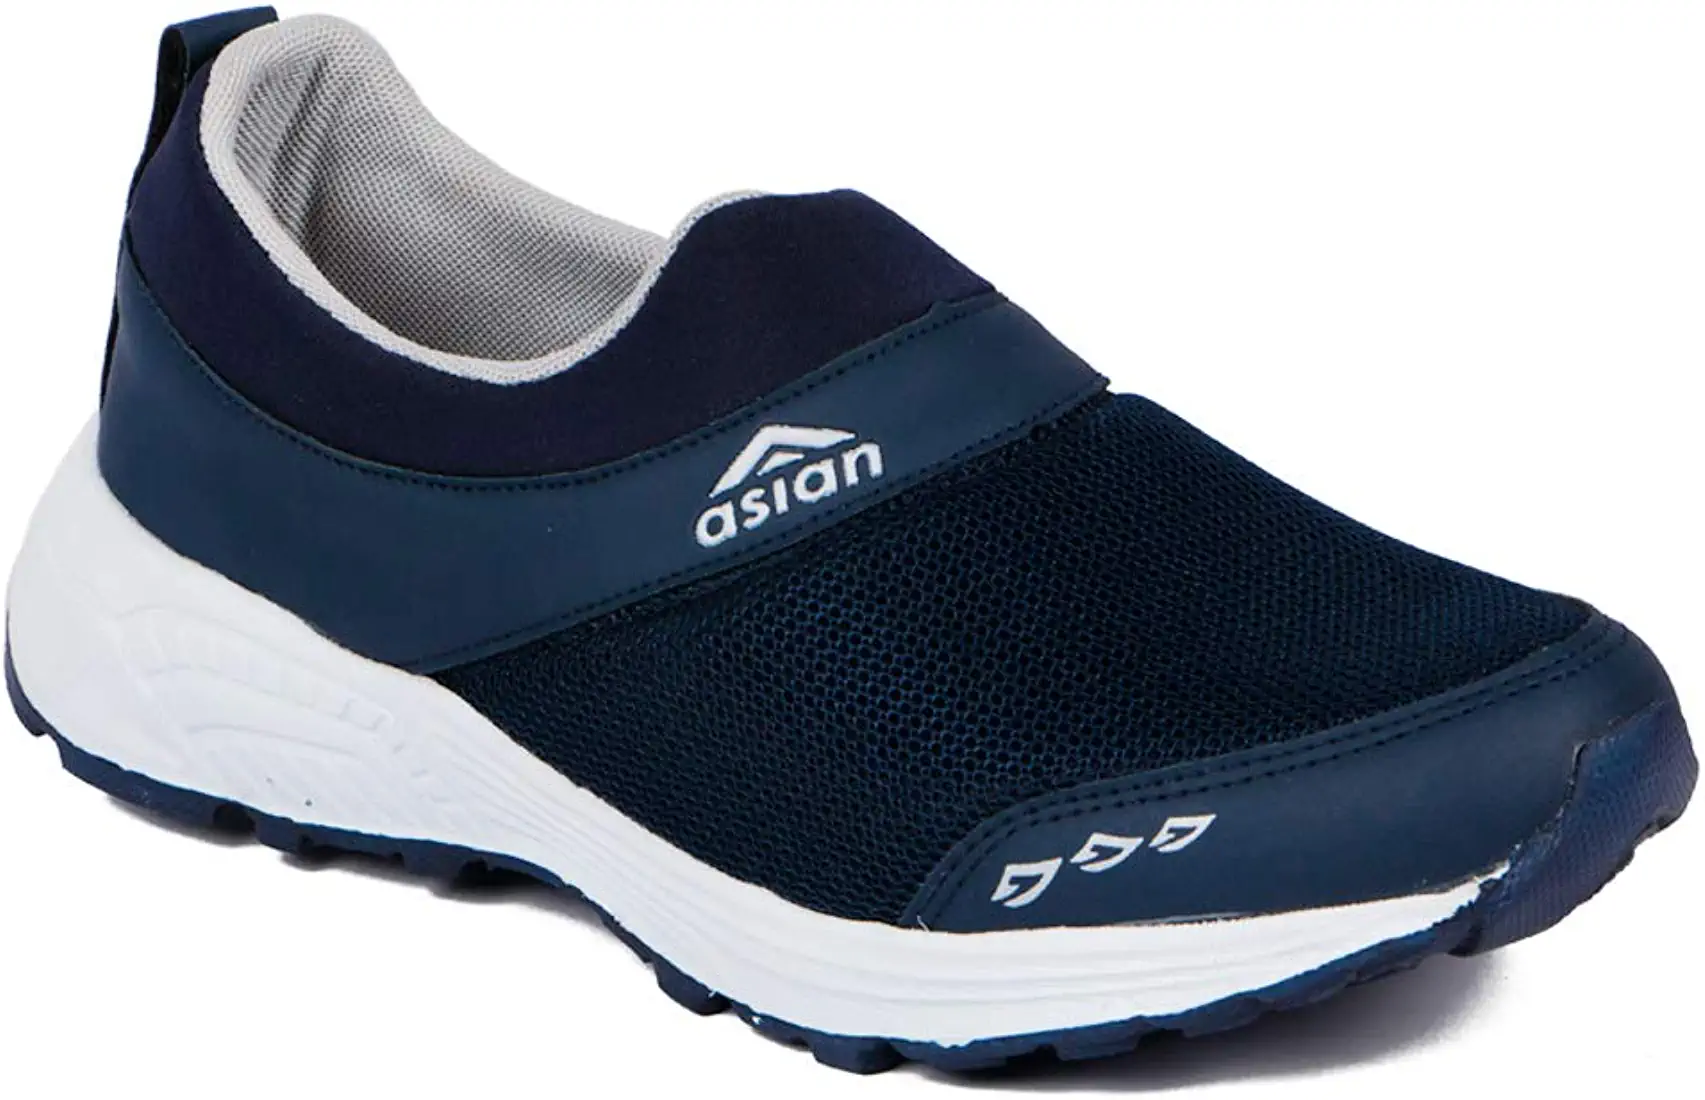 Men's Running Shoes for gym